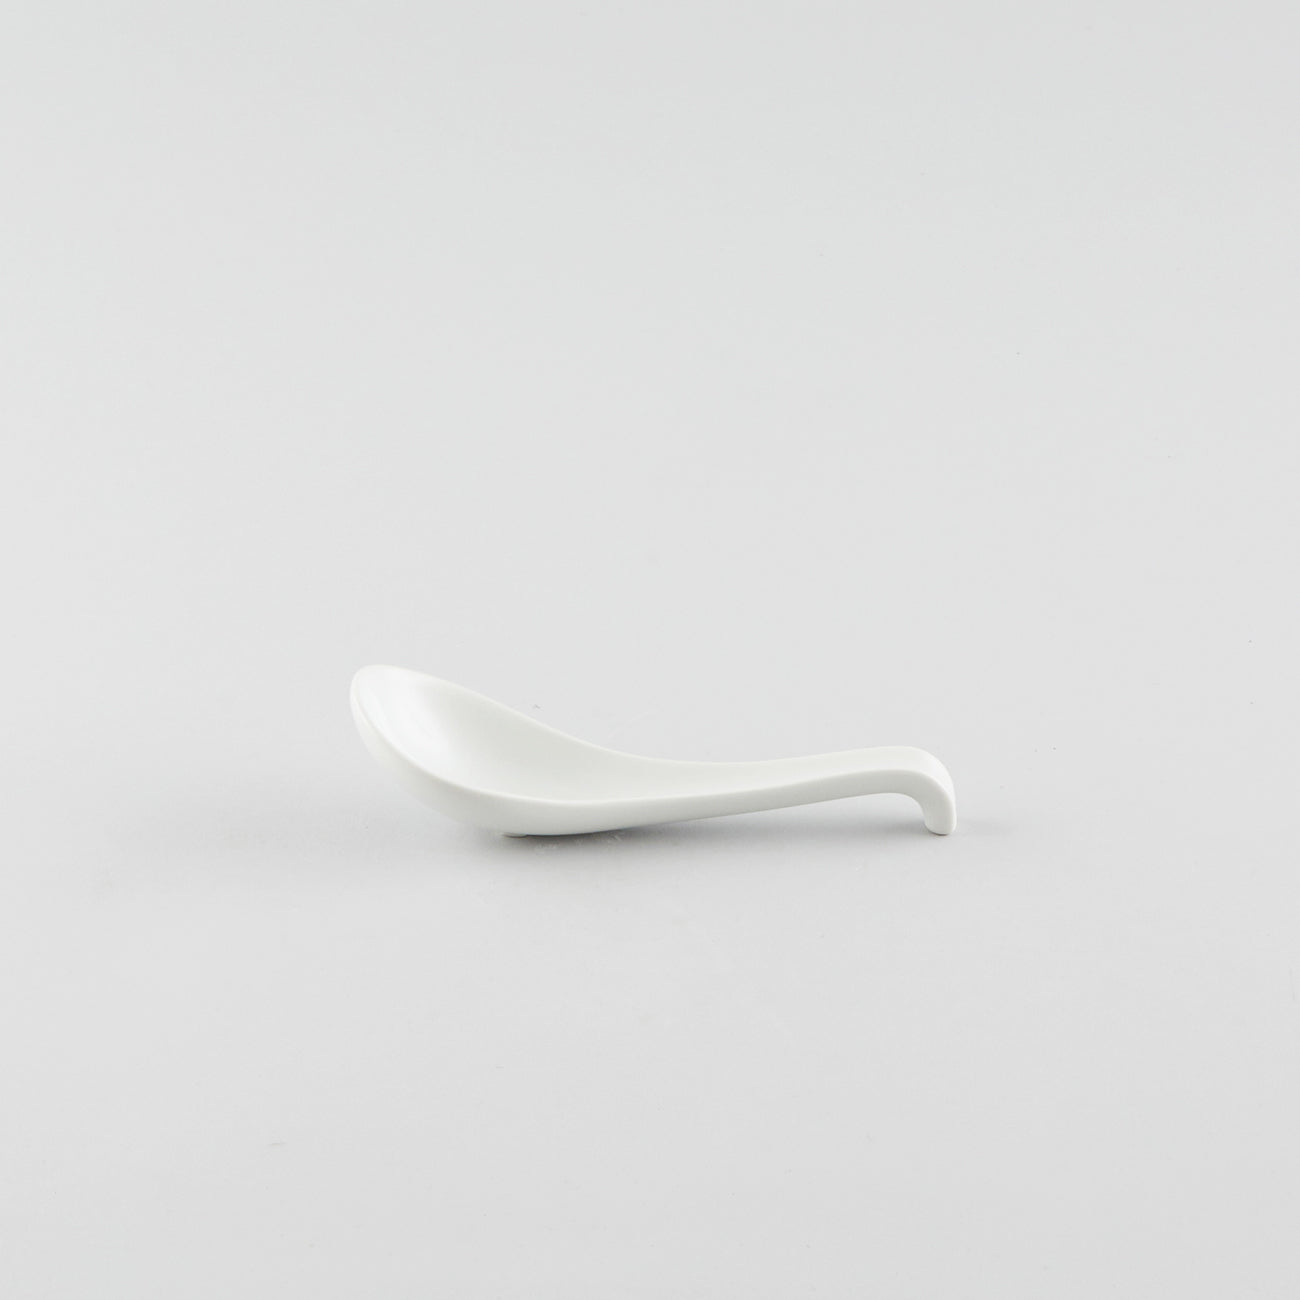 Chinese Spoon with Hook